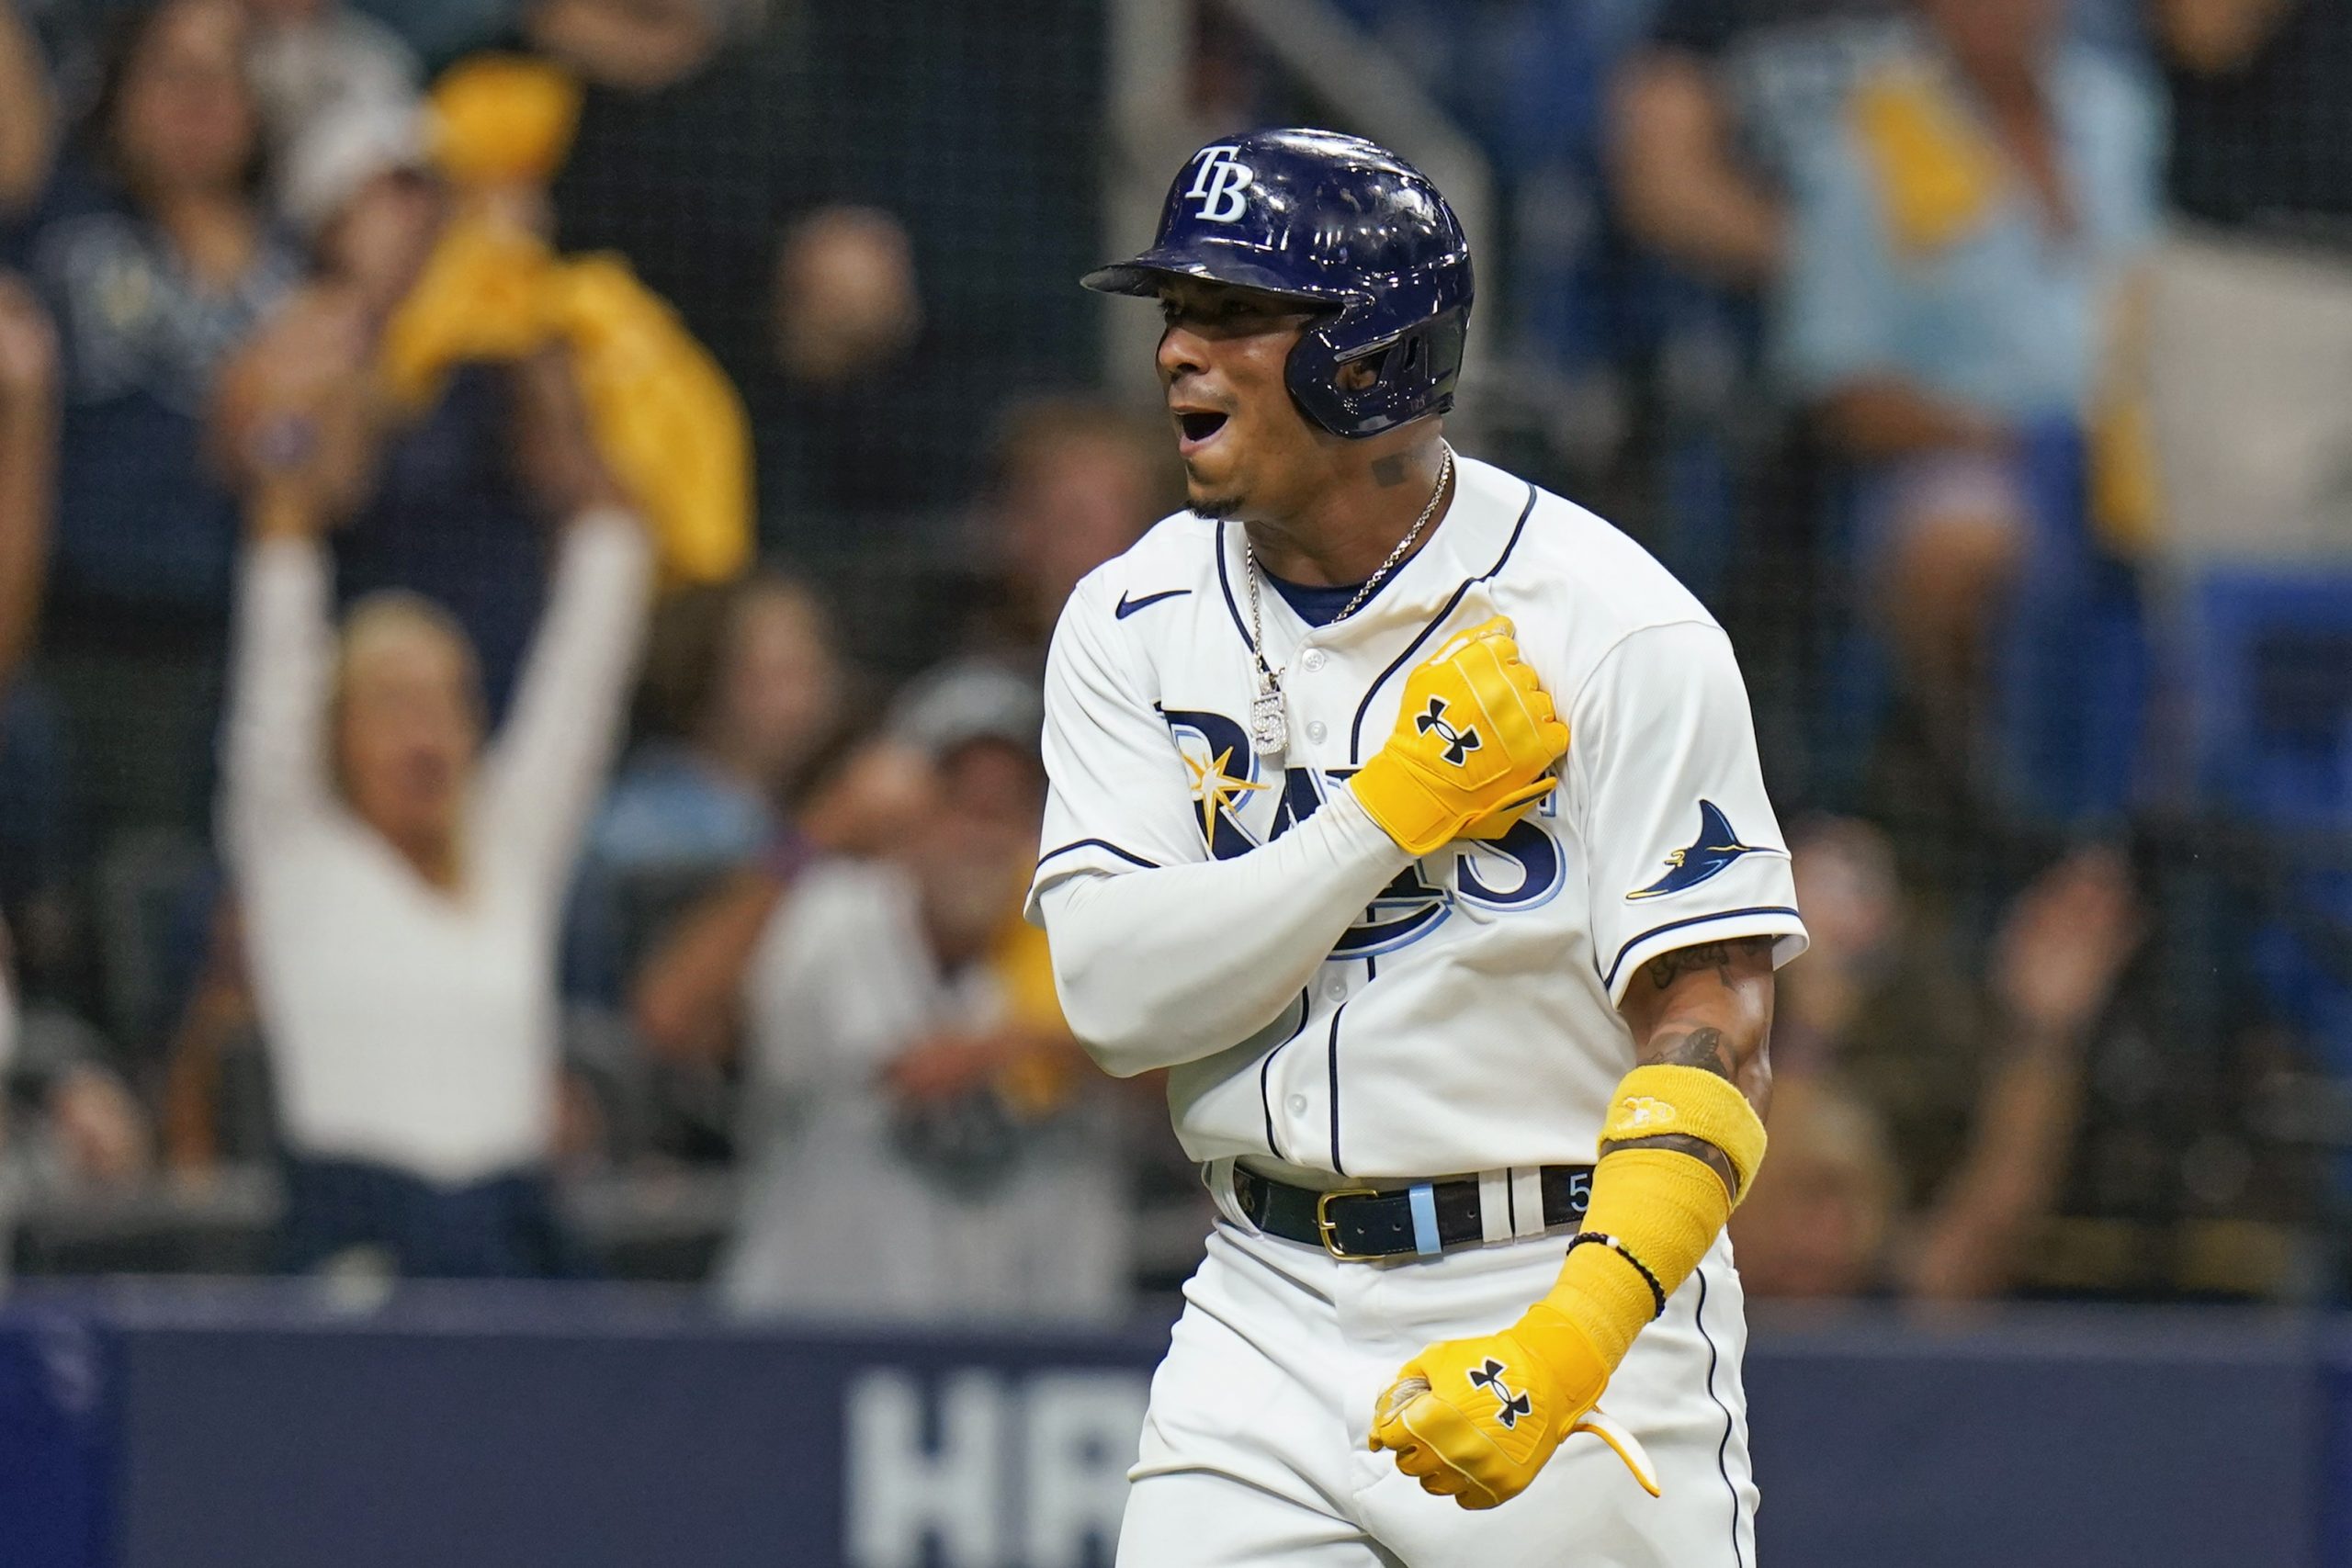 Tampa Bay Rays' Wander Franco celebrates after scoring on a single by Yandy Diaz the first inning of Game 1 of the baseball team's American League Division Series against the Boston Red Sox, on Oct. 7, 2021, in St. Petersburg, Fla.